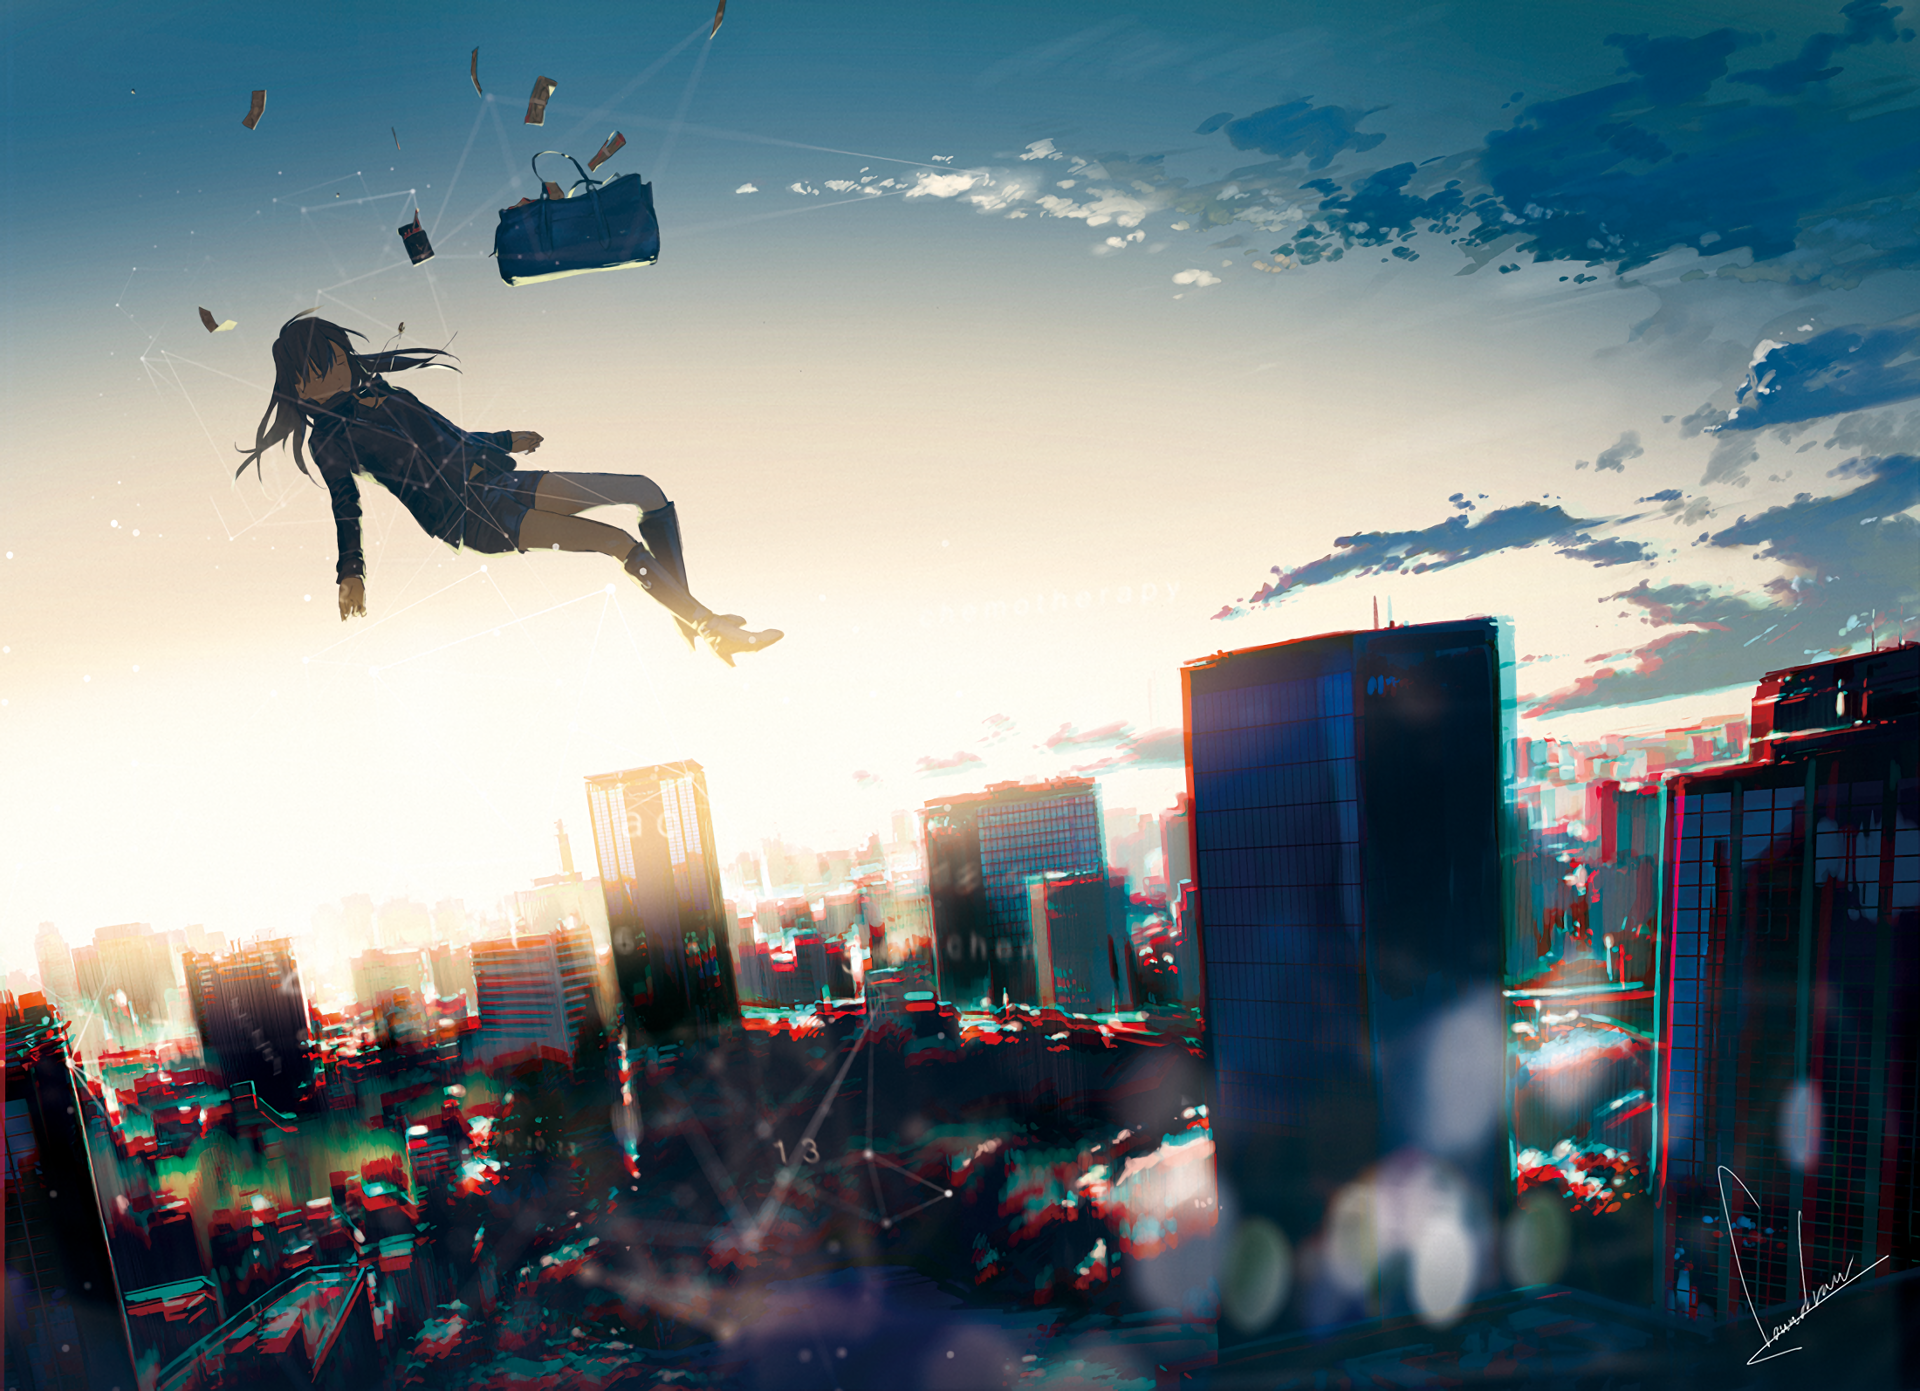 HD wallpaper: Girl falling from building, black haired anime character,  2880x1800 | Wallpaper Flare